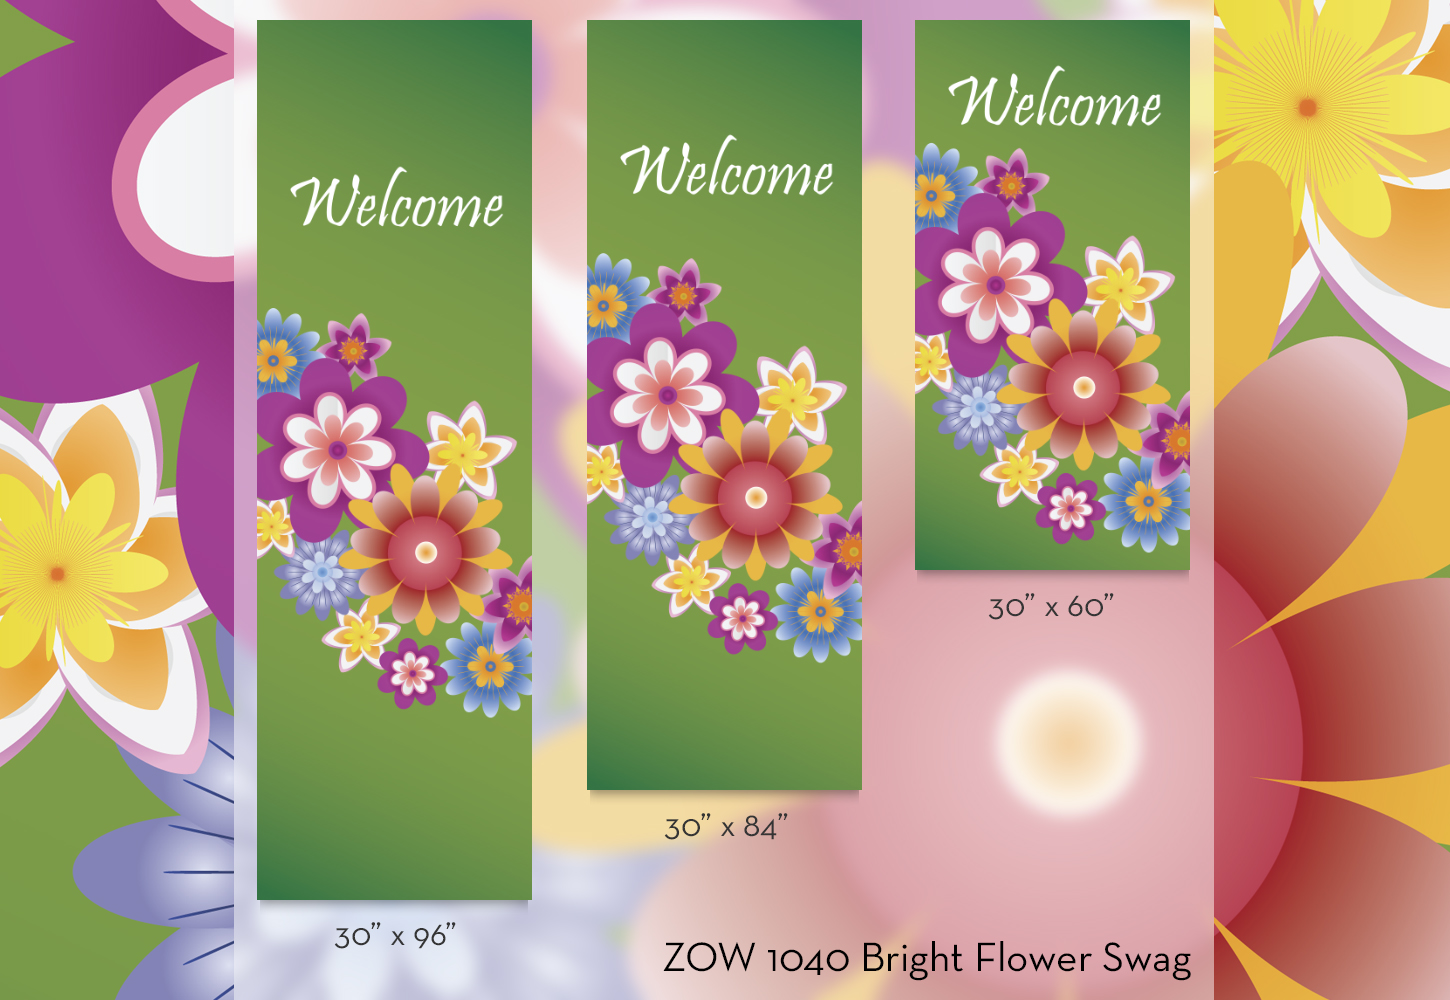 ZOW 1040 Bright Flower Swag